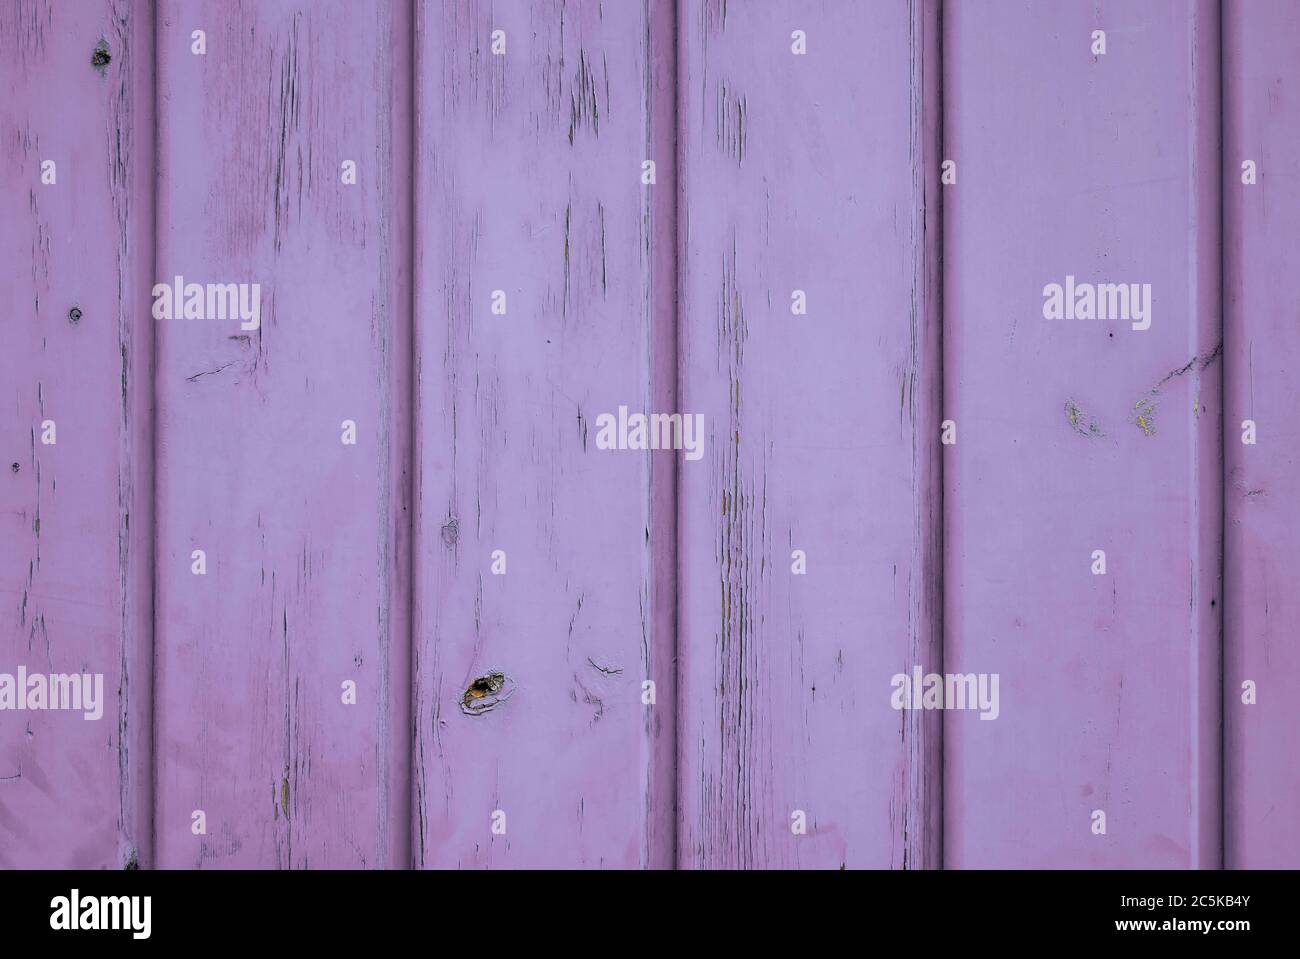 Back to the Seventies: Wooden background of purple coloured vertical planks. Cheerful 70s style retro colour. Stock Photo